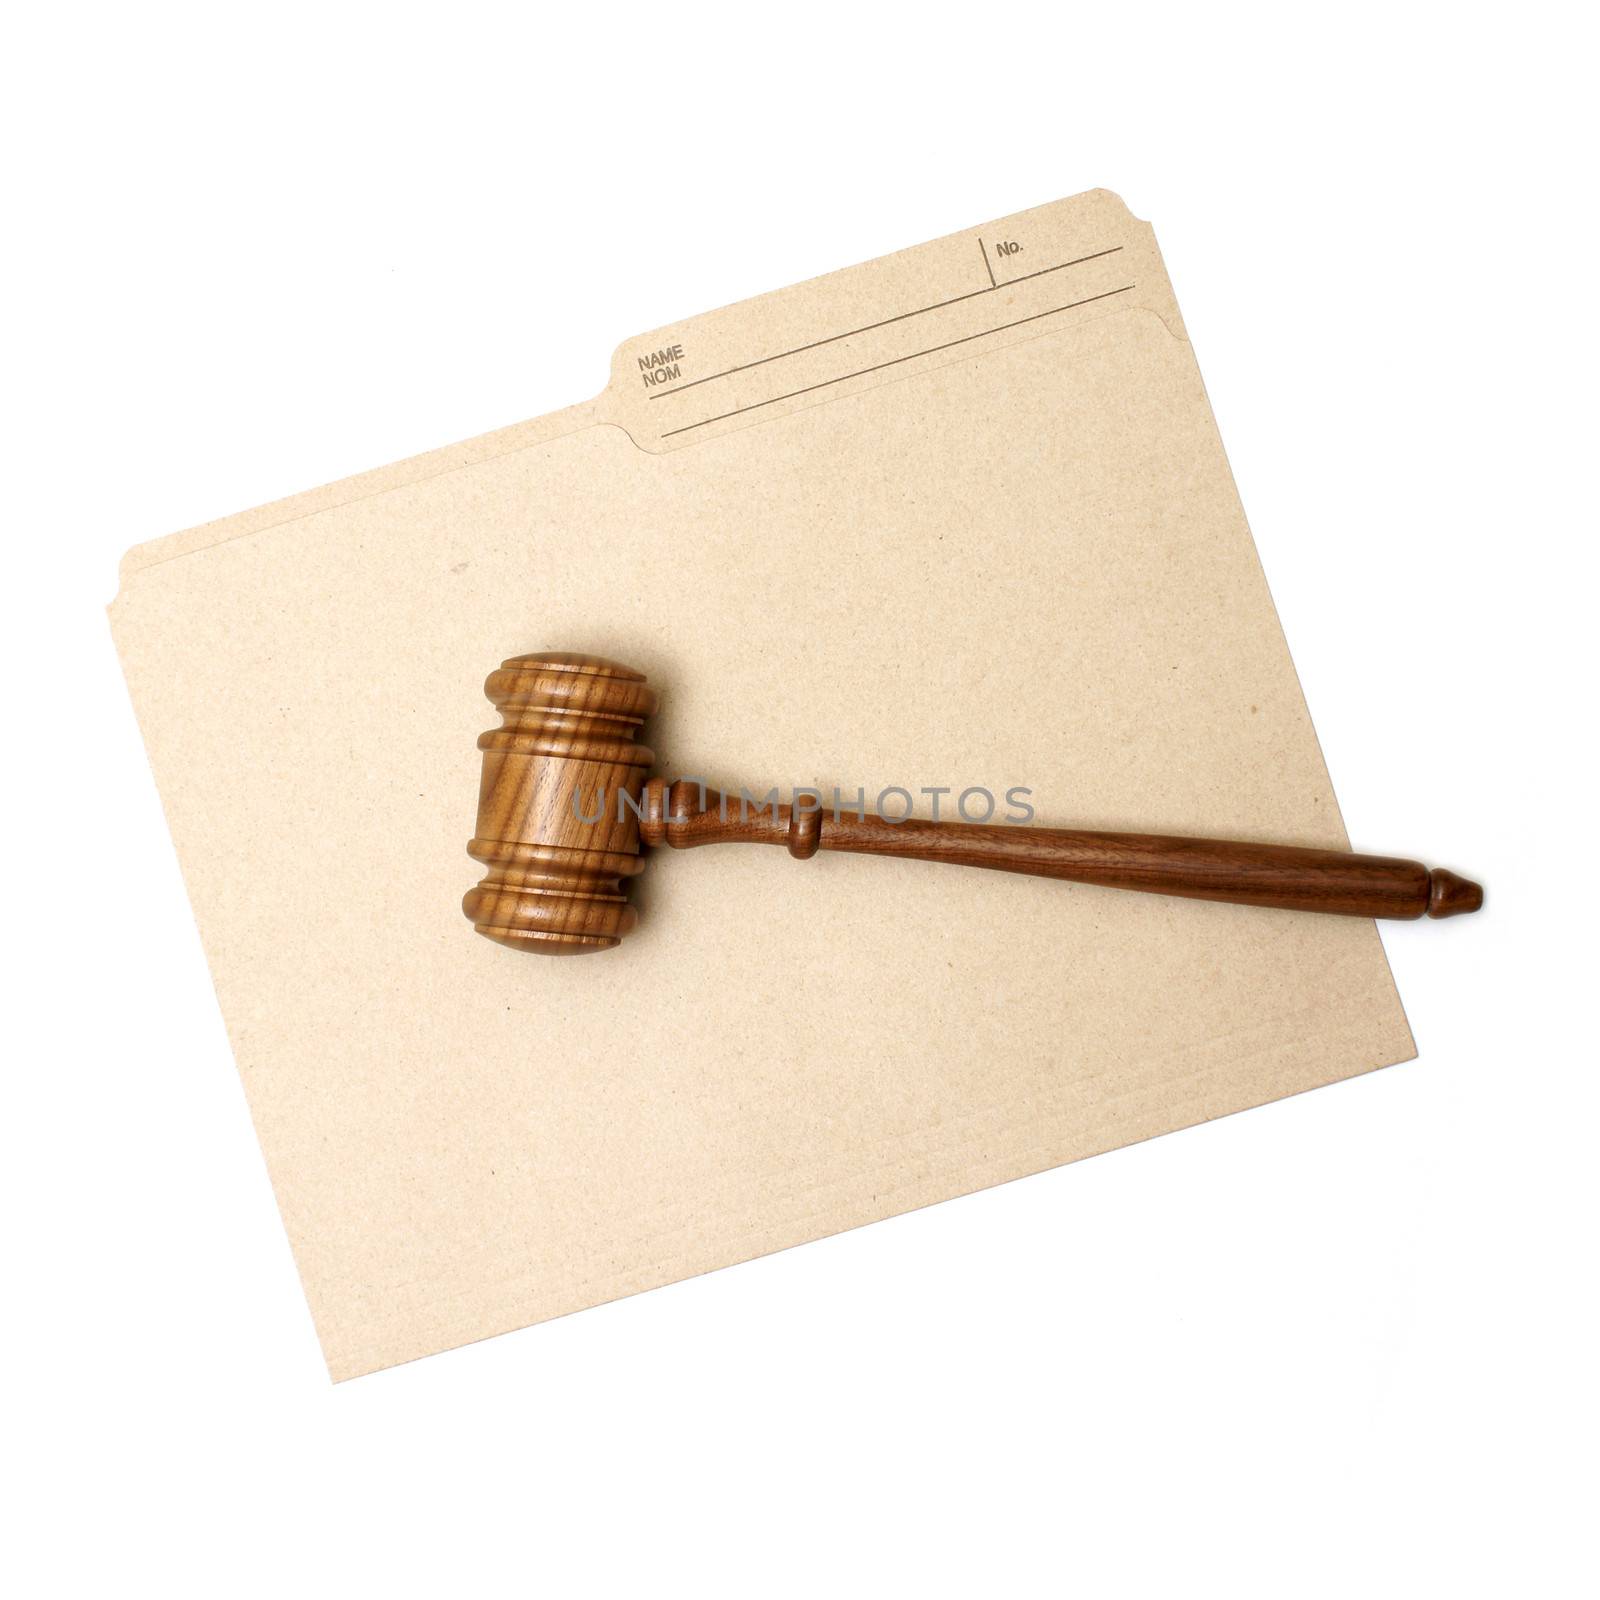 A gavel and folder represent legal documents.